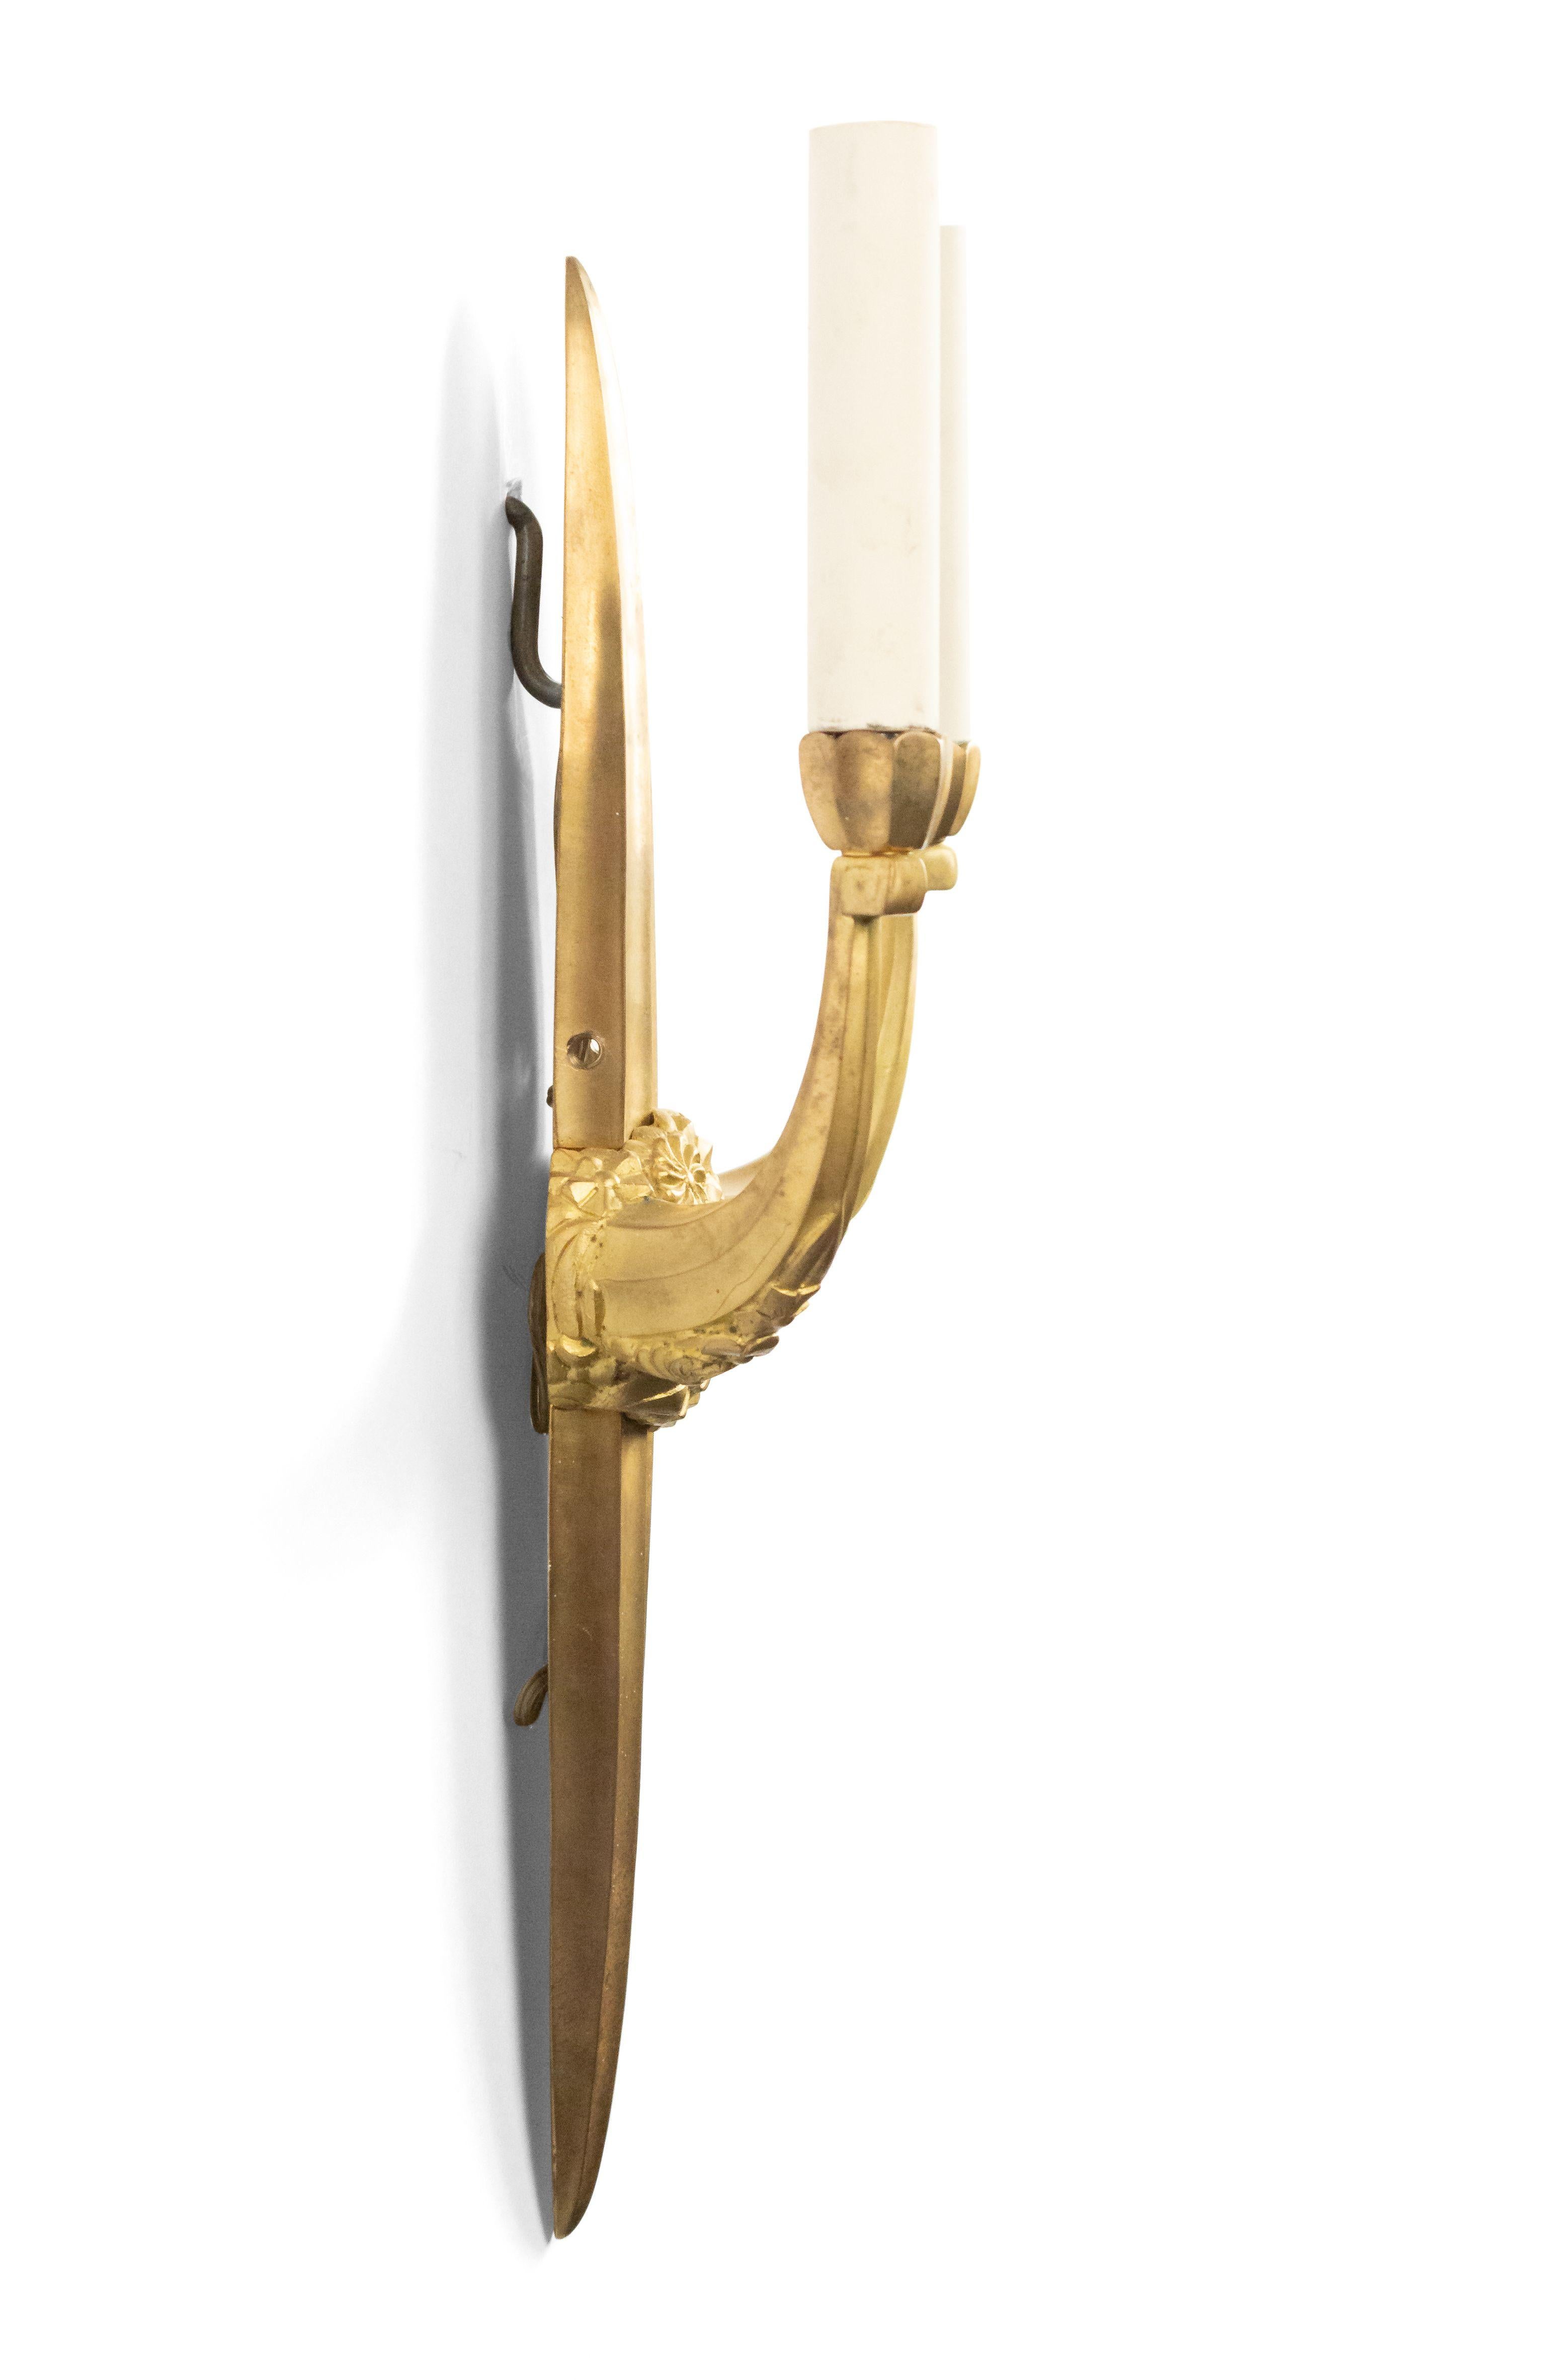 French Art Deco Style Bronze Dore Wall Sconces 'Manner of Sue et Mare' For Sale 3